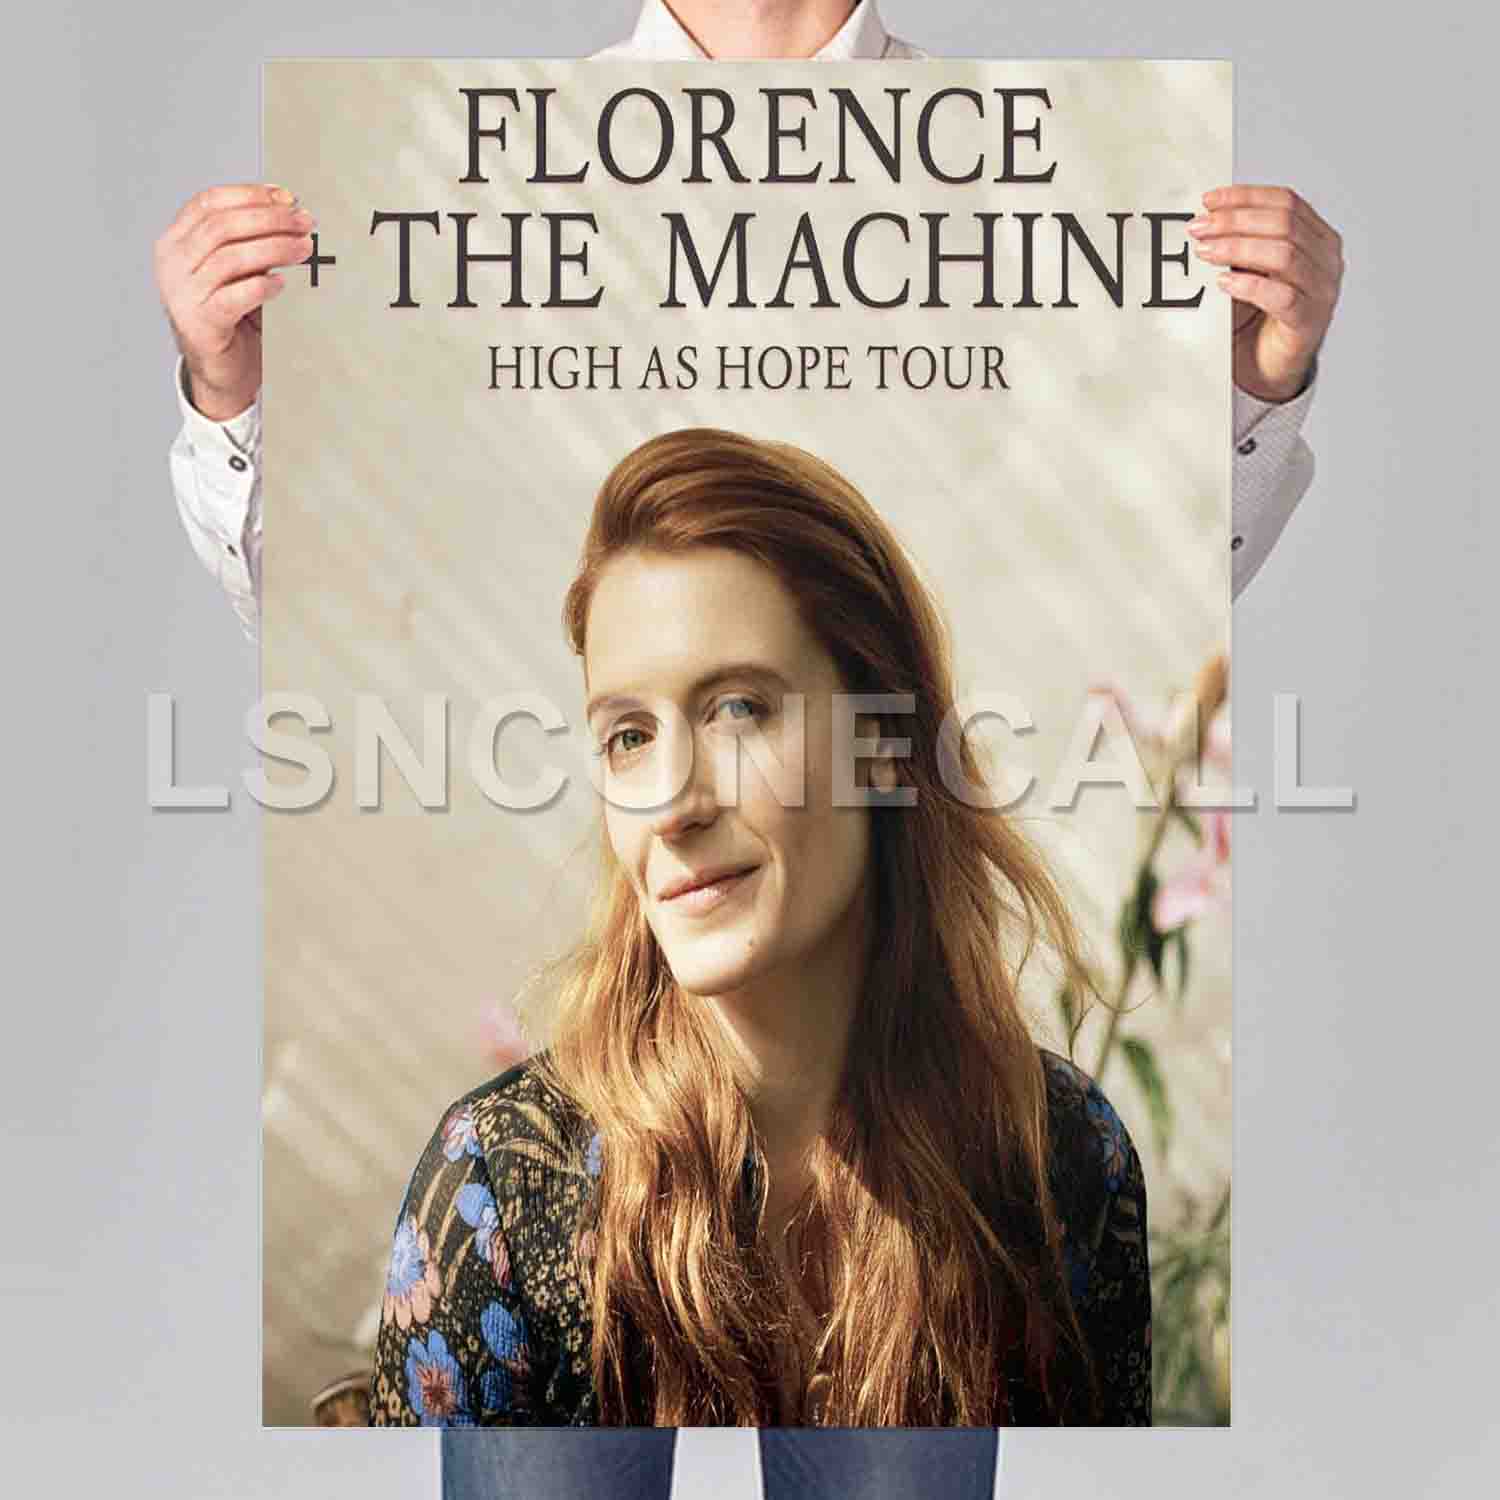 Florence + The Machine High as Hope Tour Poster Print Art Wall Decor